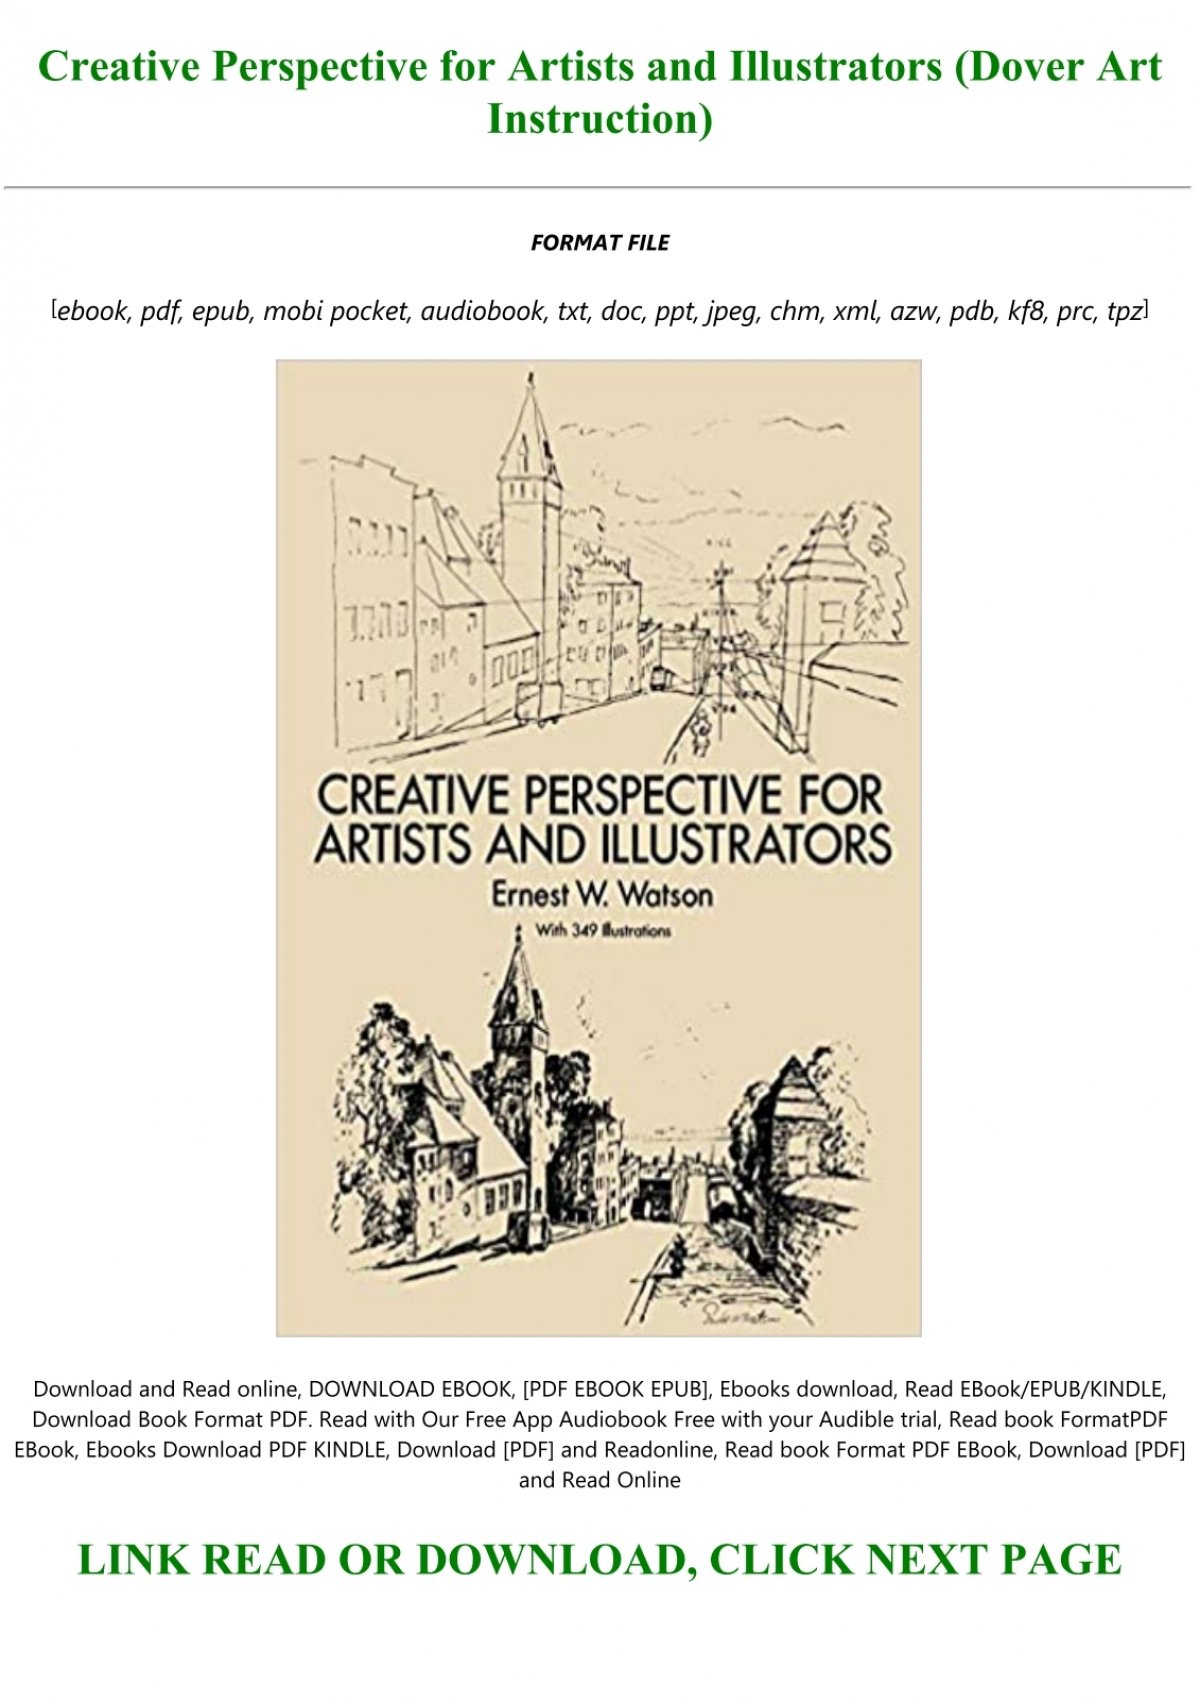 creative perspective for artists and illustrators pdf download